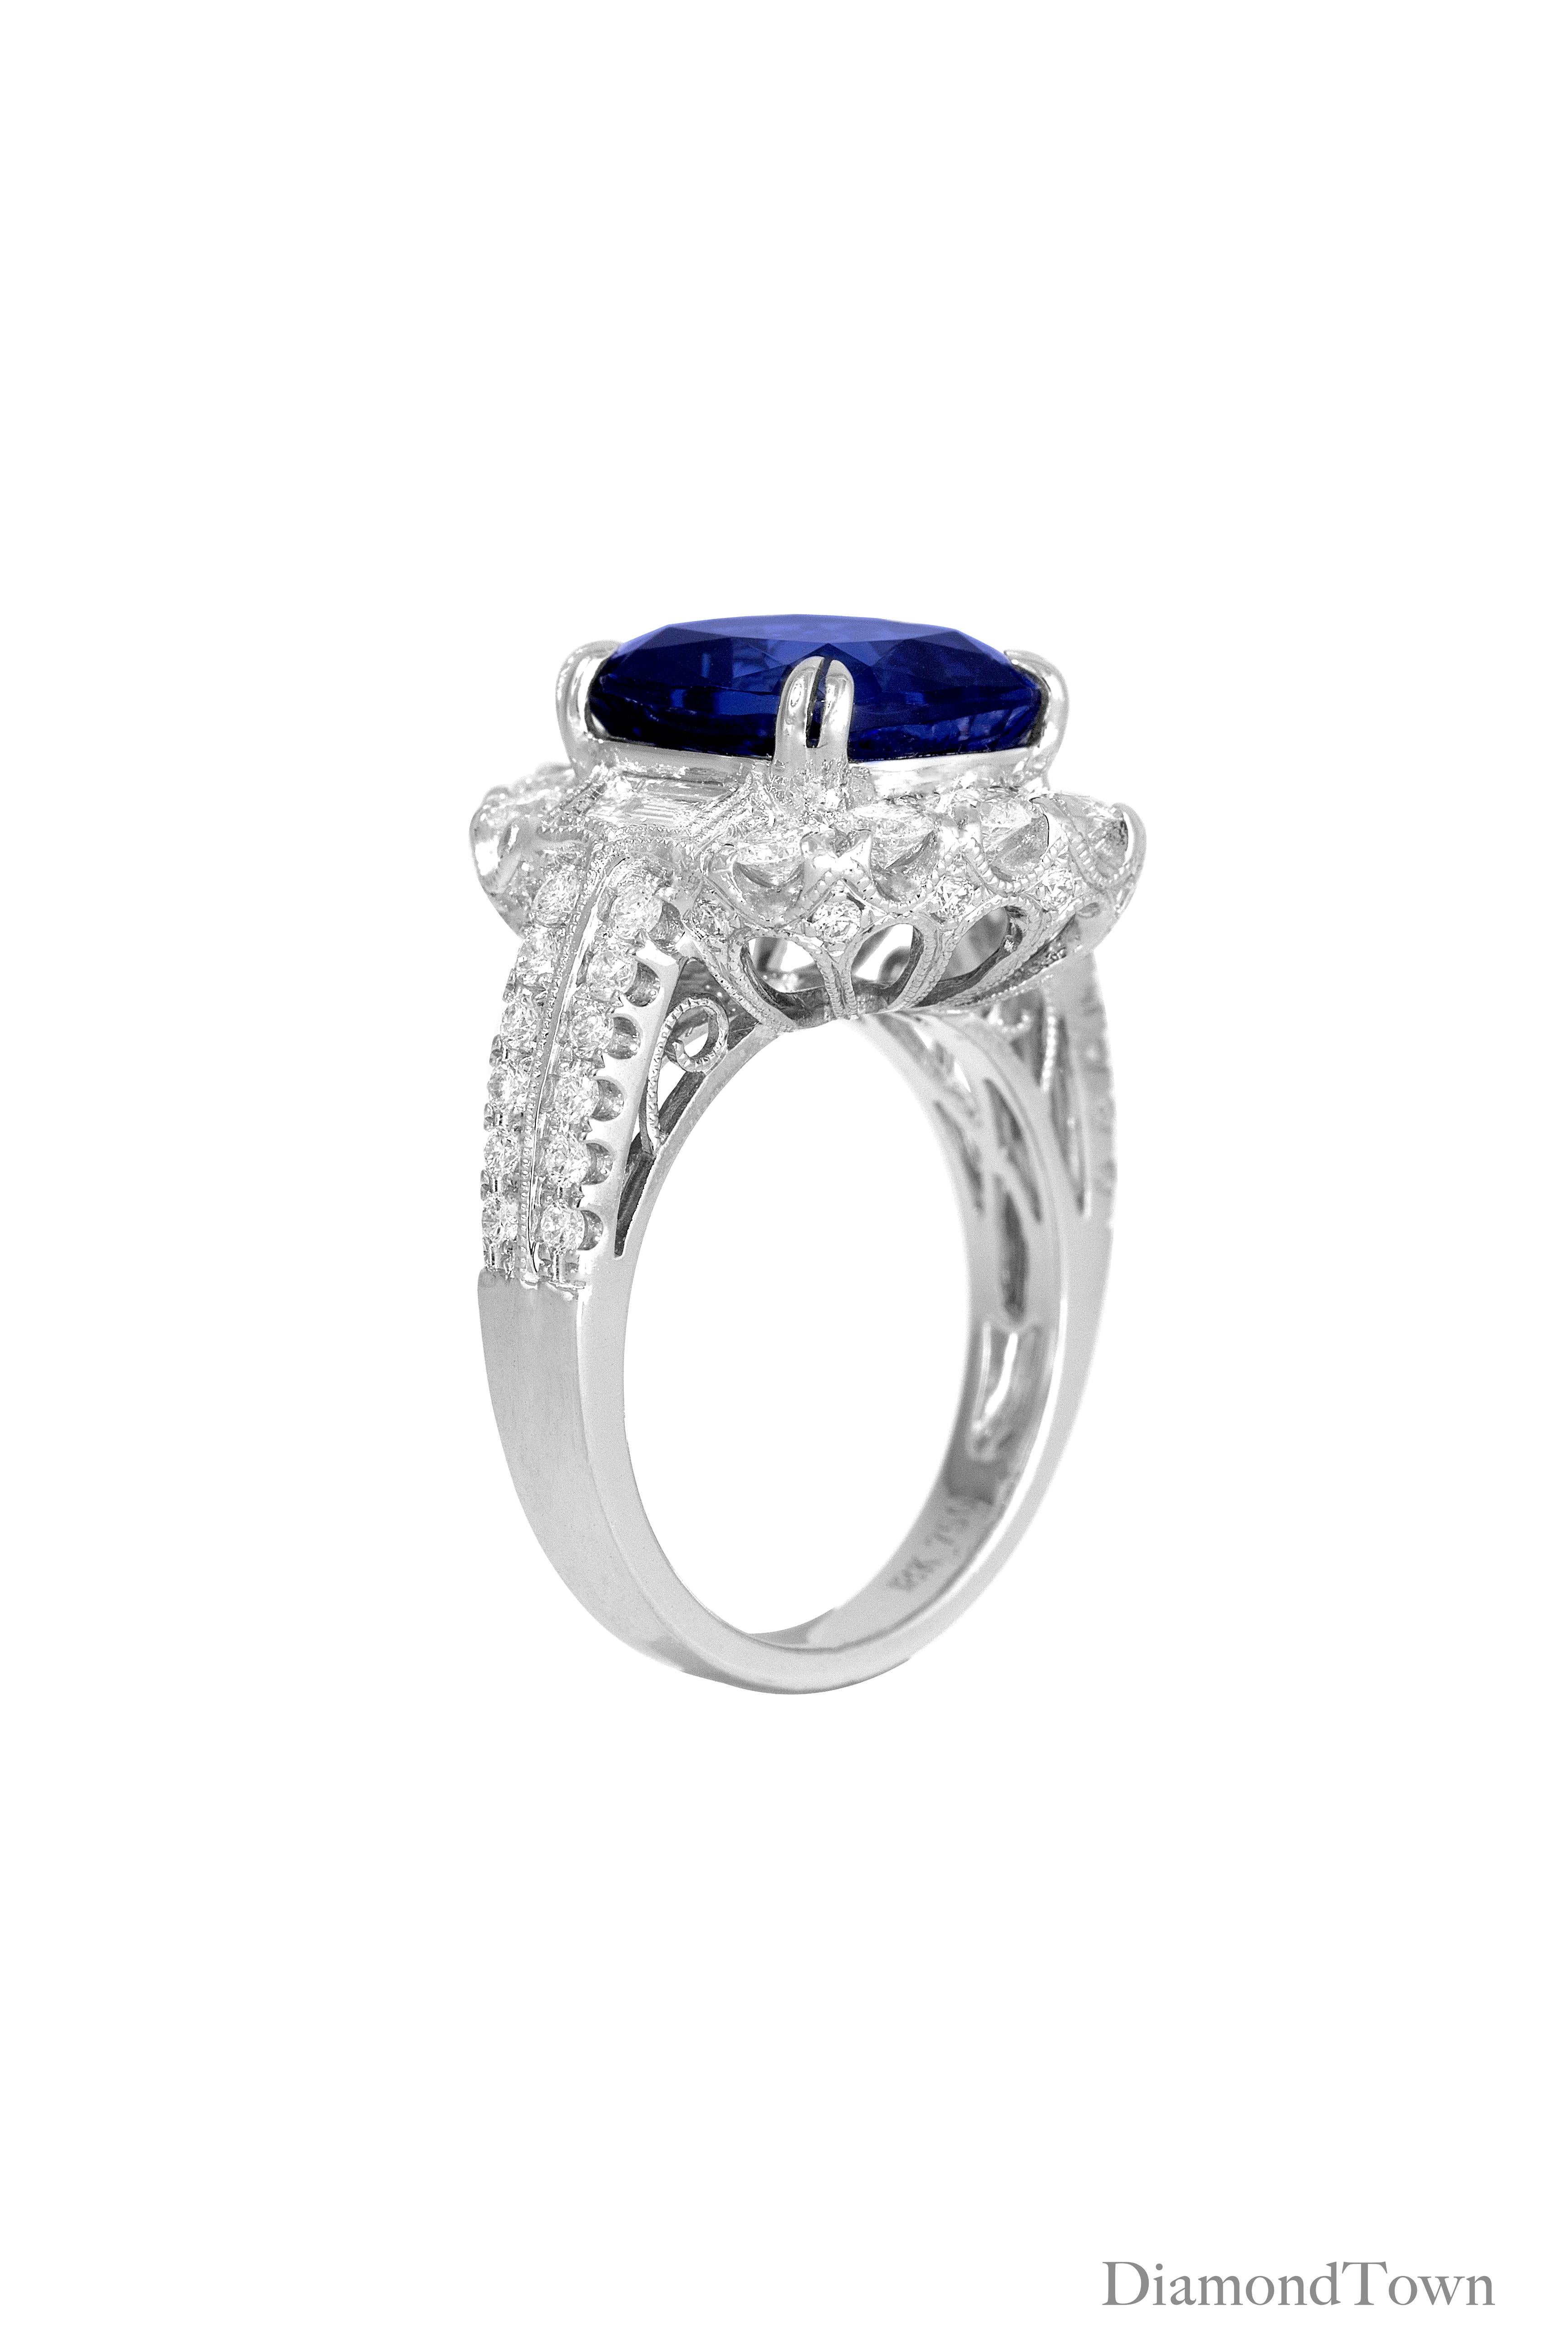 (DiamondTown) This ring sparkles with a 5.96 Carat Tanzanite center, flanked by 2 tapered baguette diamonds and a halo of round diamonds, and additional diamonds trailing down the side shank, bringing the total diamond weight to 1.47